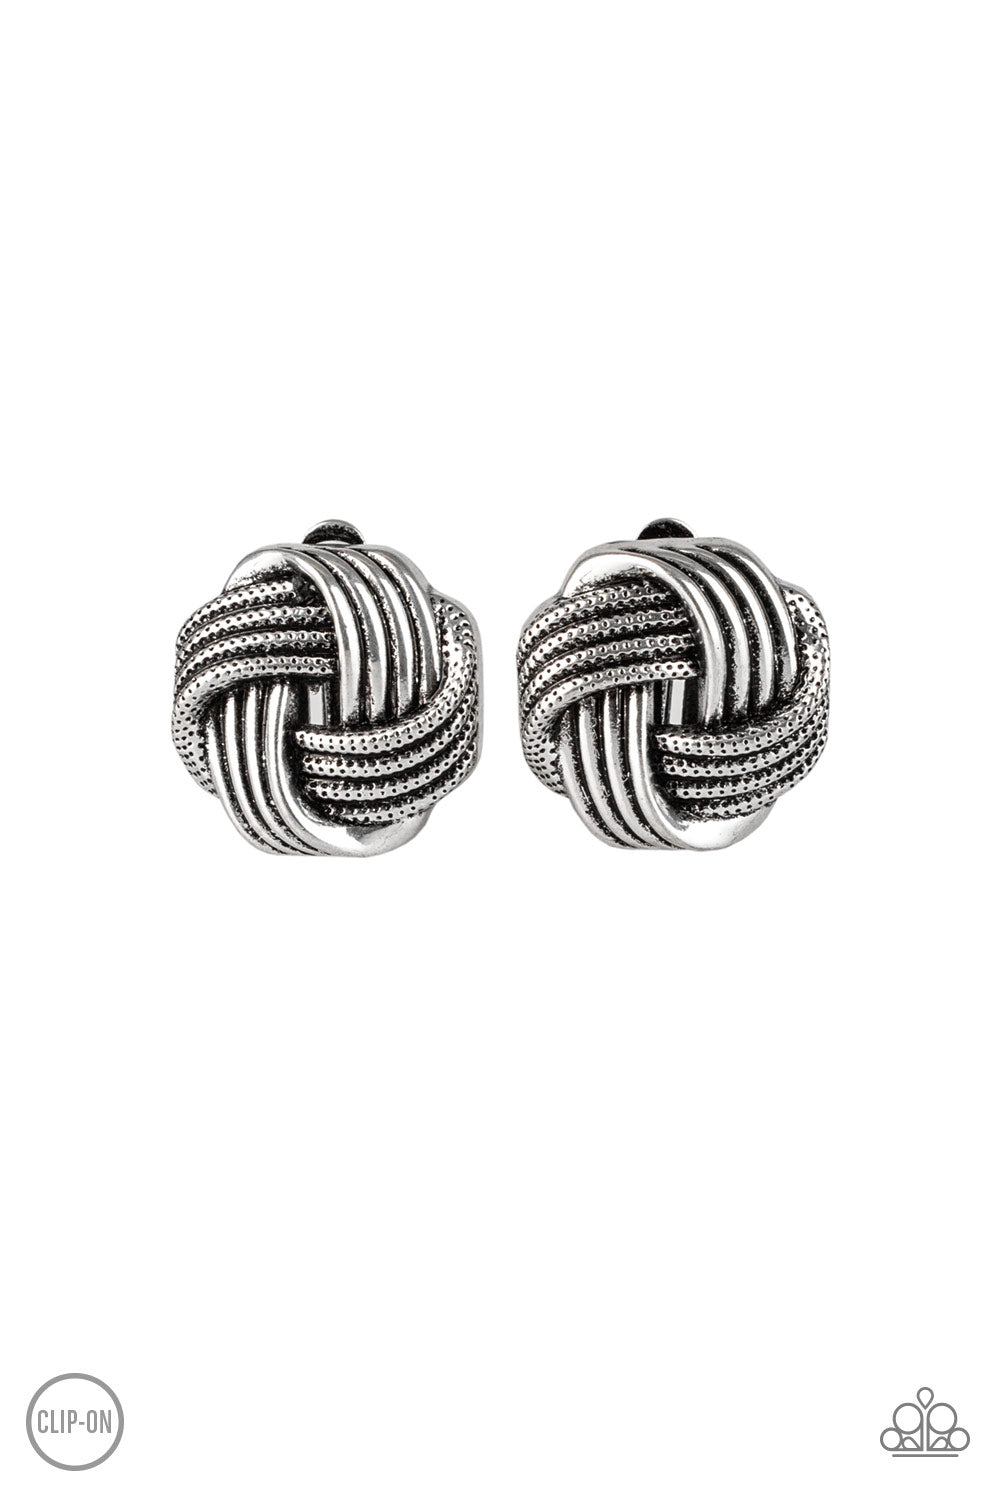 Noticeably Knotted Silver Paparazzi Earring Cashmere Pink Jewels - Cashmere Pink Jewels & Accessories, Cashmere Pink Jewels & Accessories - Paparazzi